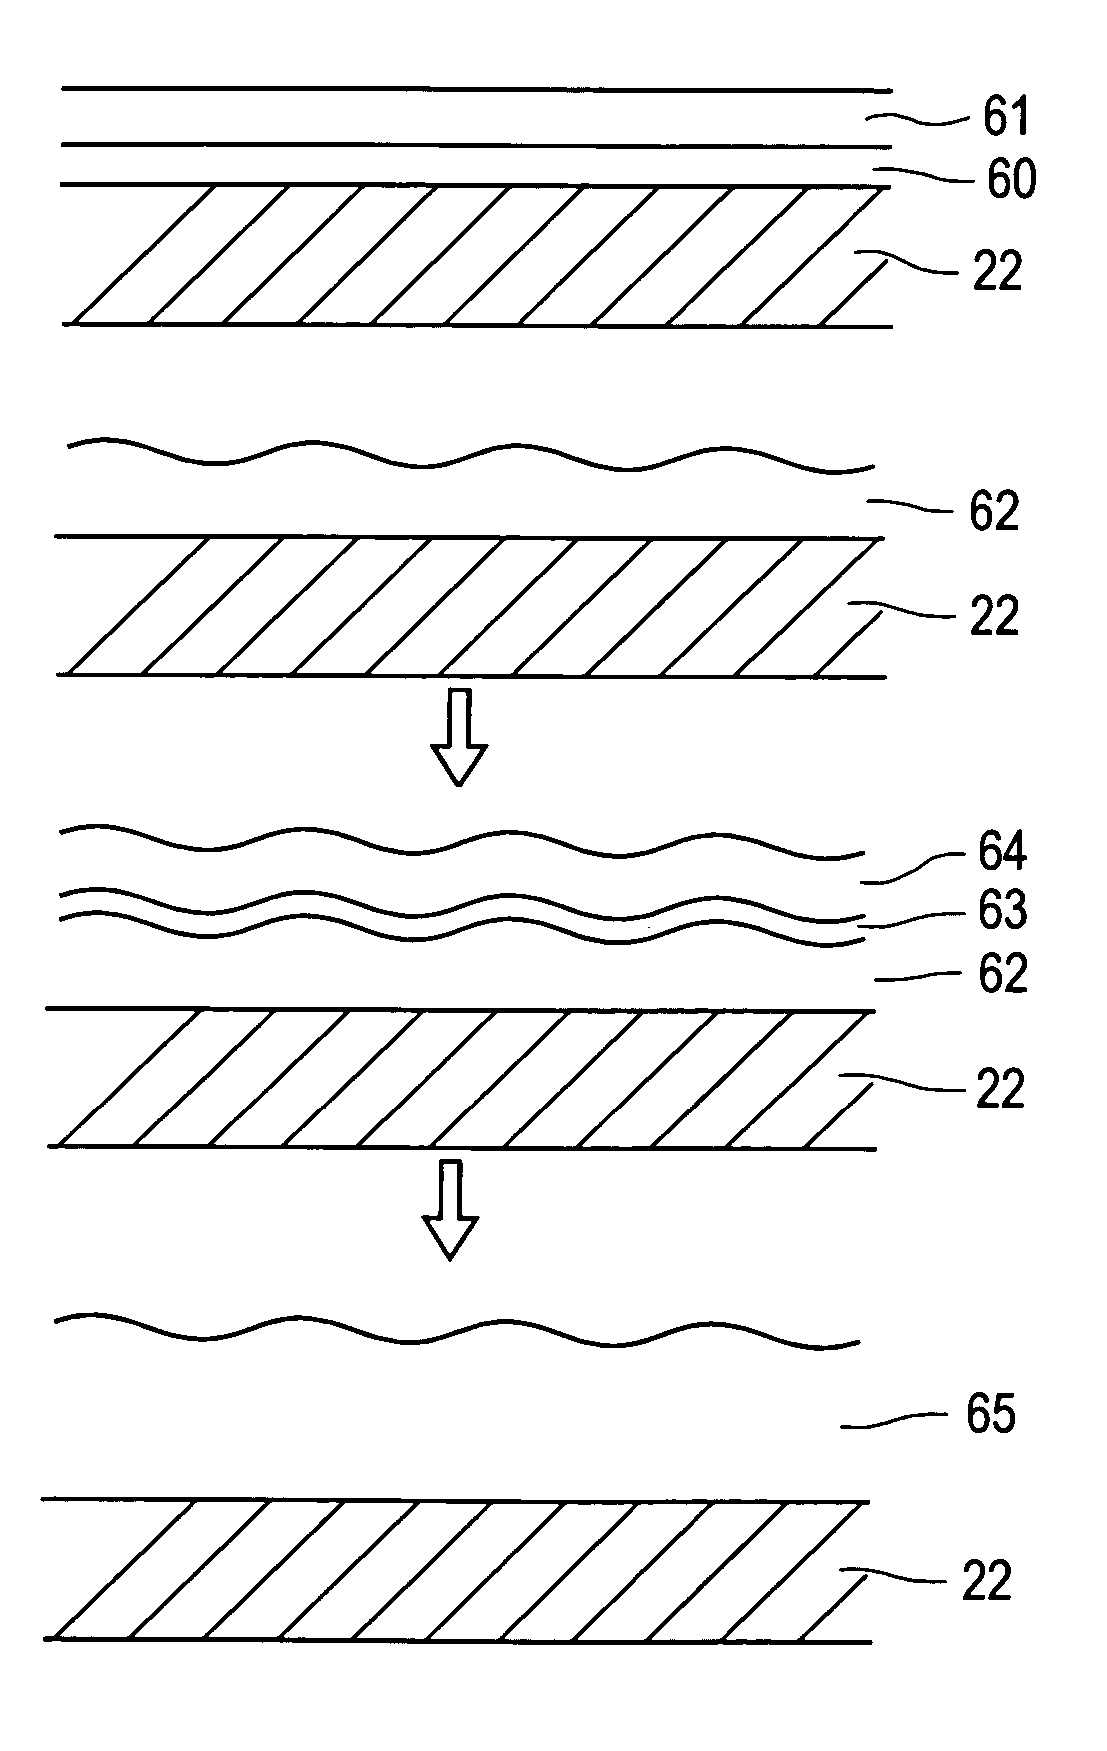 Technique and apparatus for depositing thin layers of semiconductors for solar cell fabrication